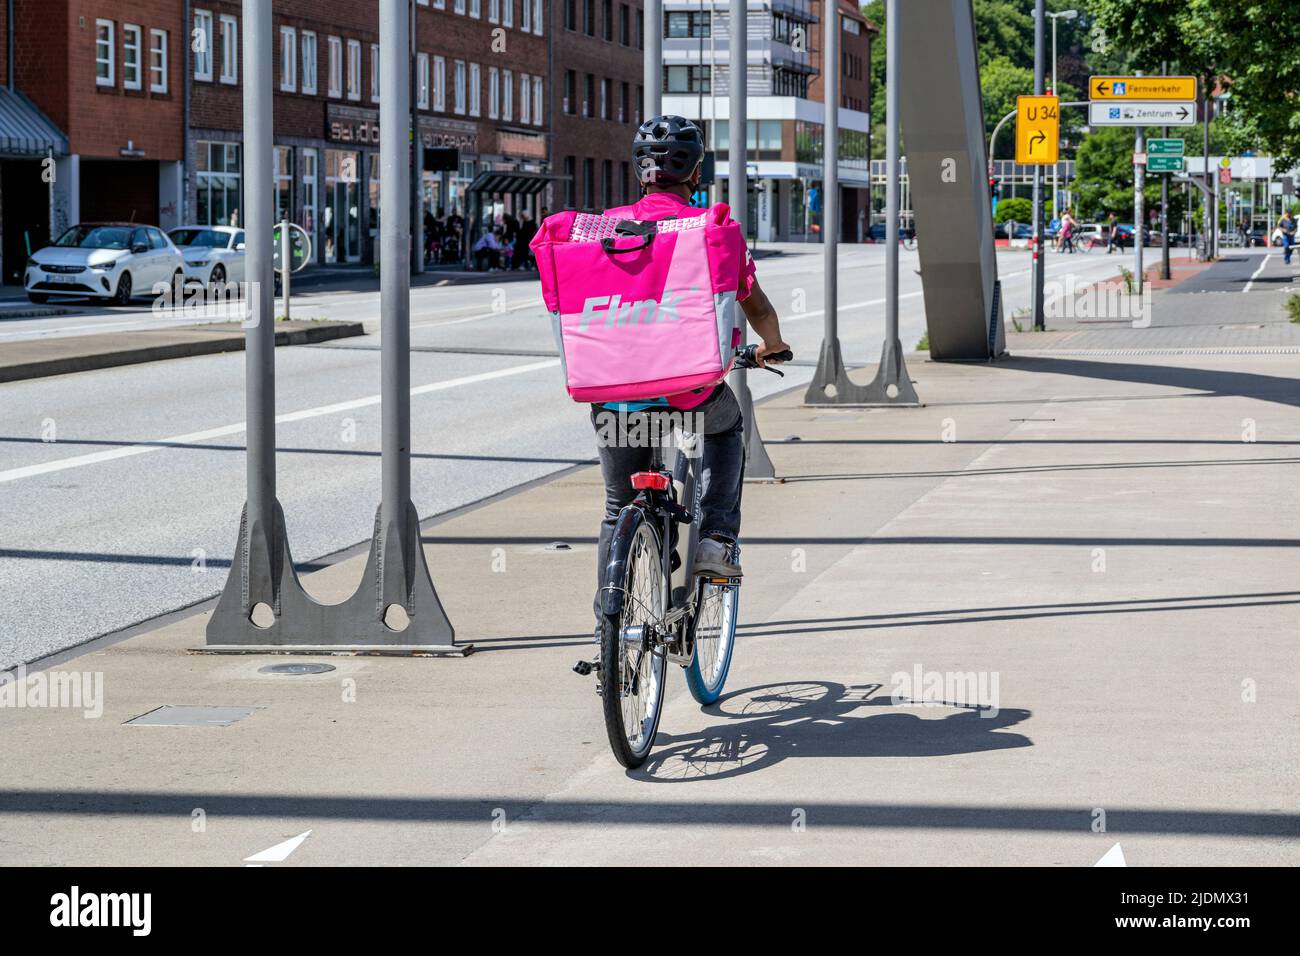 Flink on-demand delivery service courier on bike Stock Photo